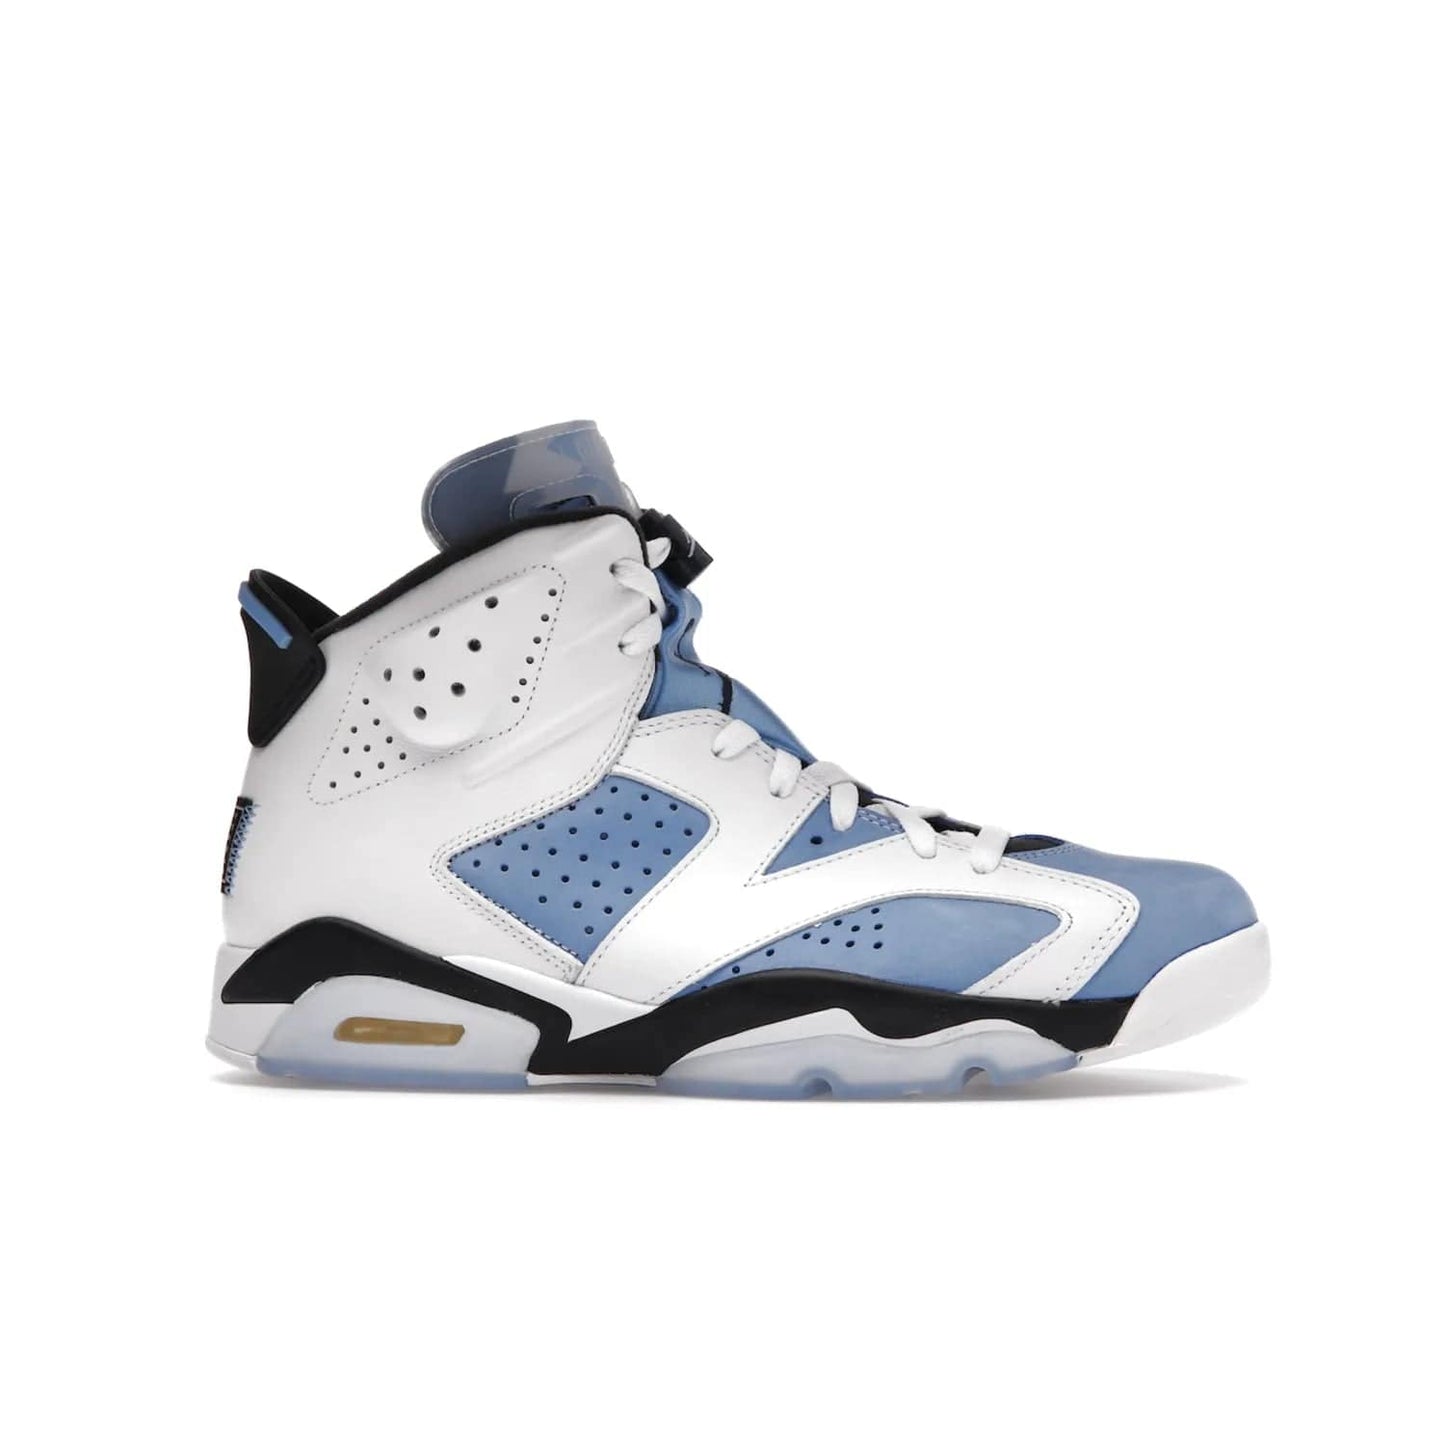 Jordan 6 Retro UNC White - Image 2 - Only at www.BallersClubKickz.com - Air Jordan 6 Retro UNC White with classic UNC colors brings nostalgia and style to a legendary silhouette. Celebrate MJ's alma mater with navy blue accents, icy semi-translucent sole and Jordan Team patch. Out March 2022 for the Sneaker Enthusiast.